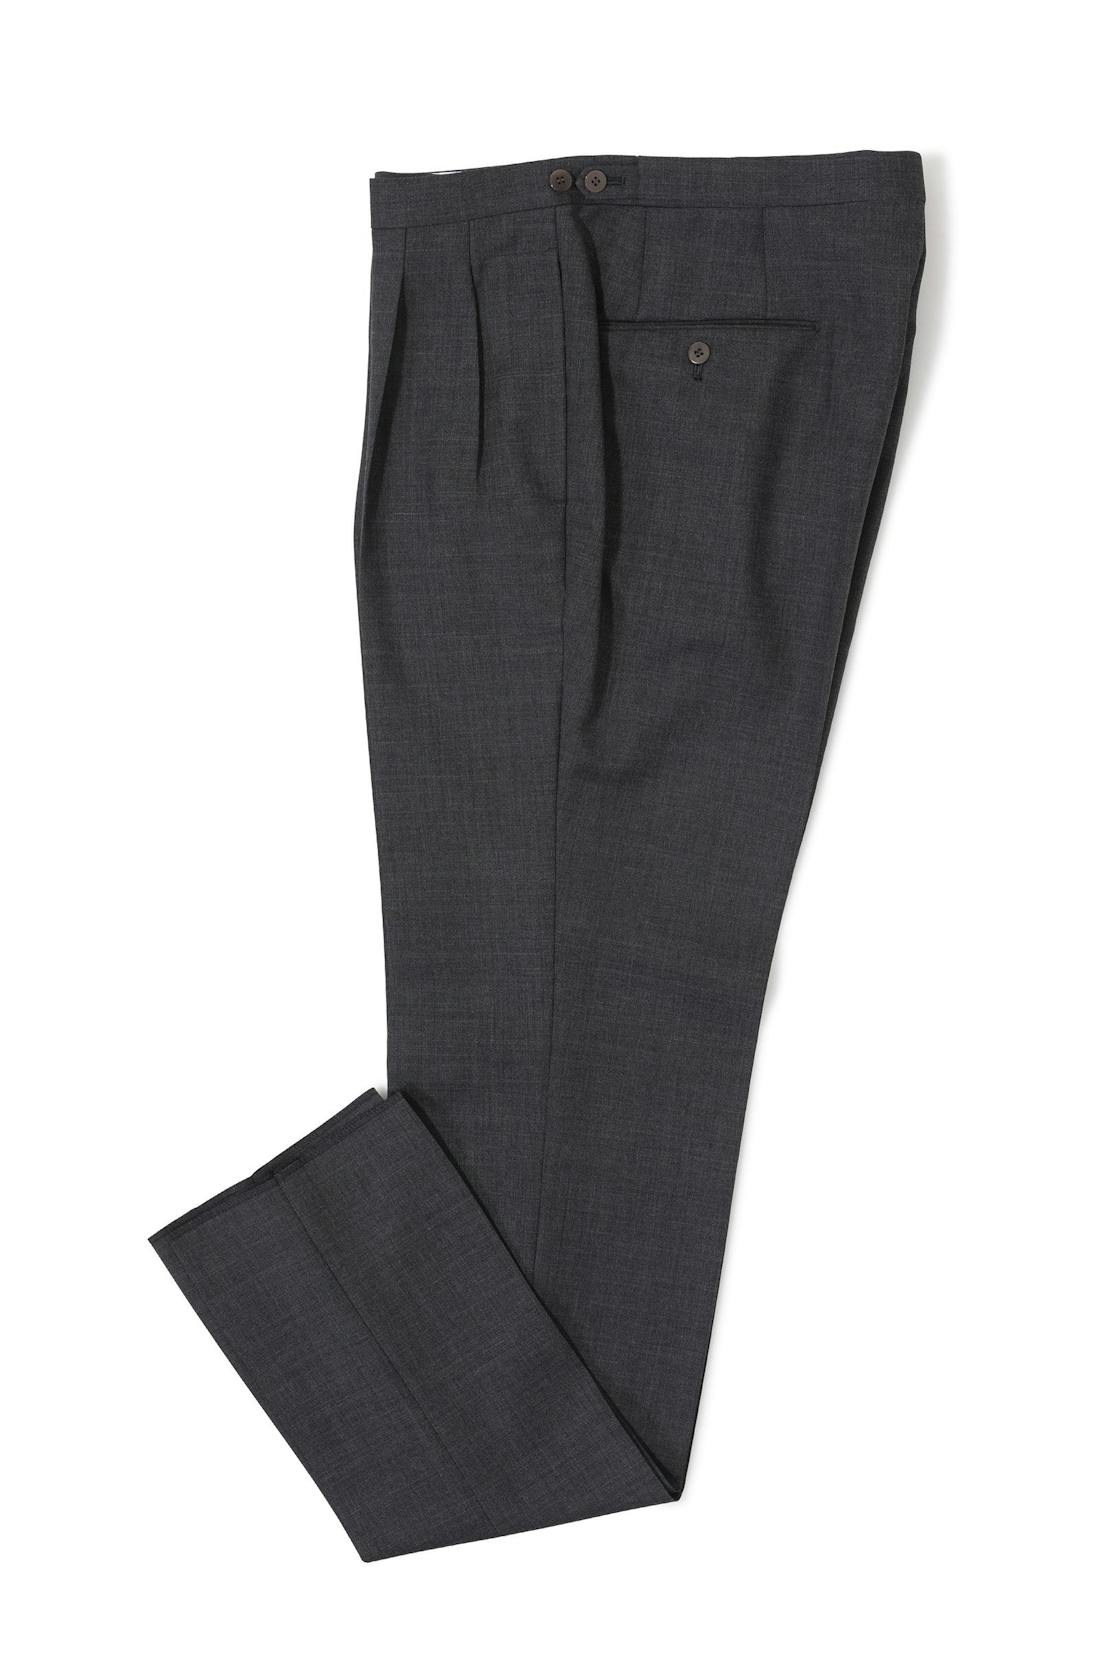 The Armoury by Osaku Charcoal NZ Wool Double Pleated CO Trousers